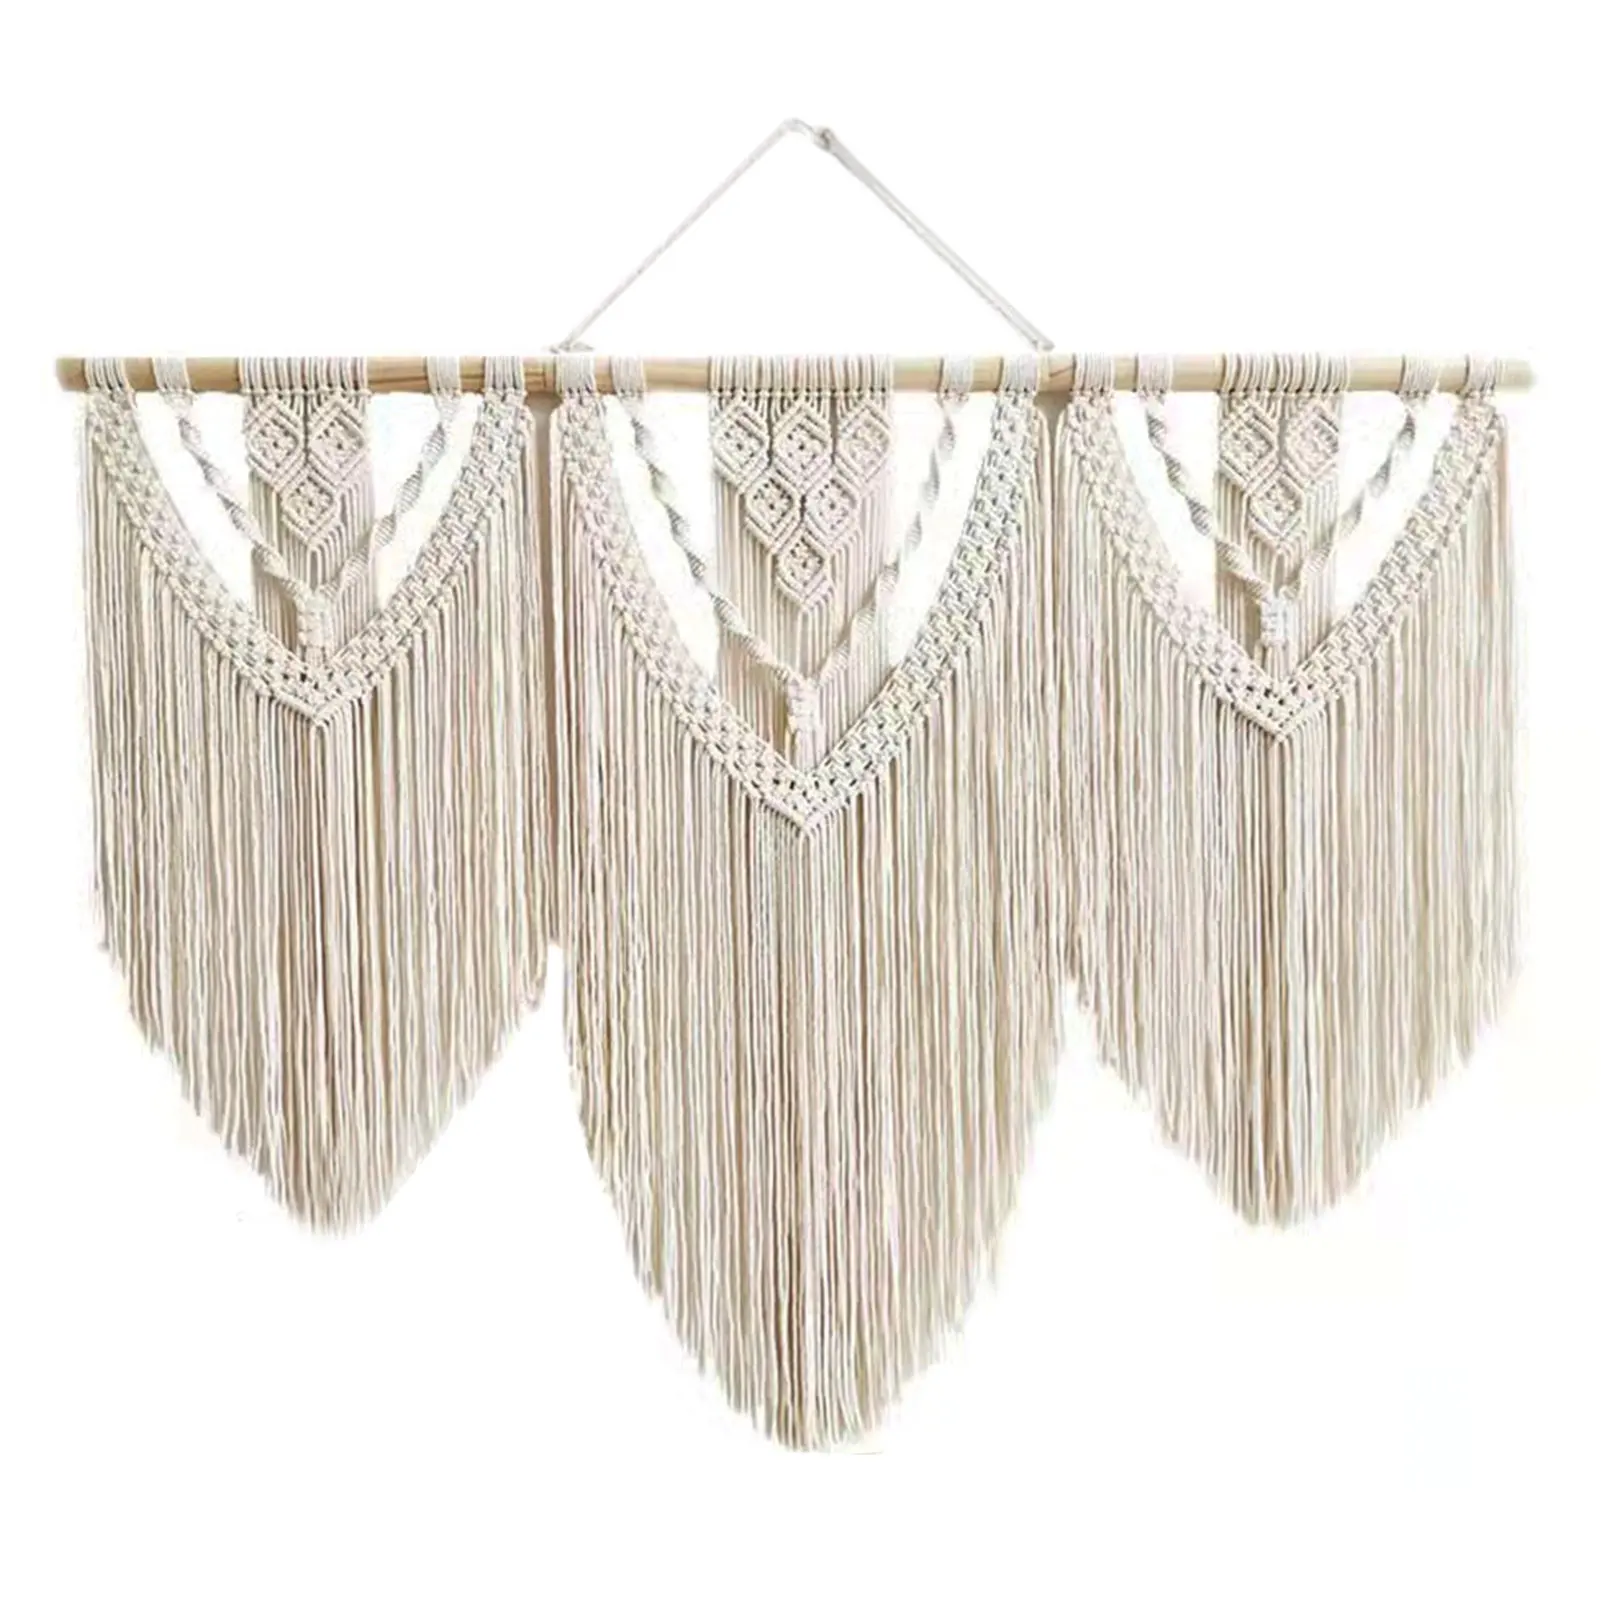 

Macrame Tapestry 110 X 82cm Curtain Bedroom Wall Hanging Tassel Large Background Wedding Home Decor With Wooden Stick Hand Woven